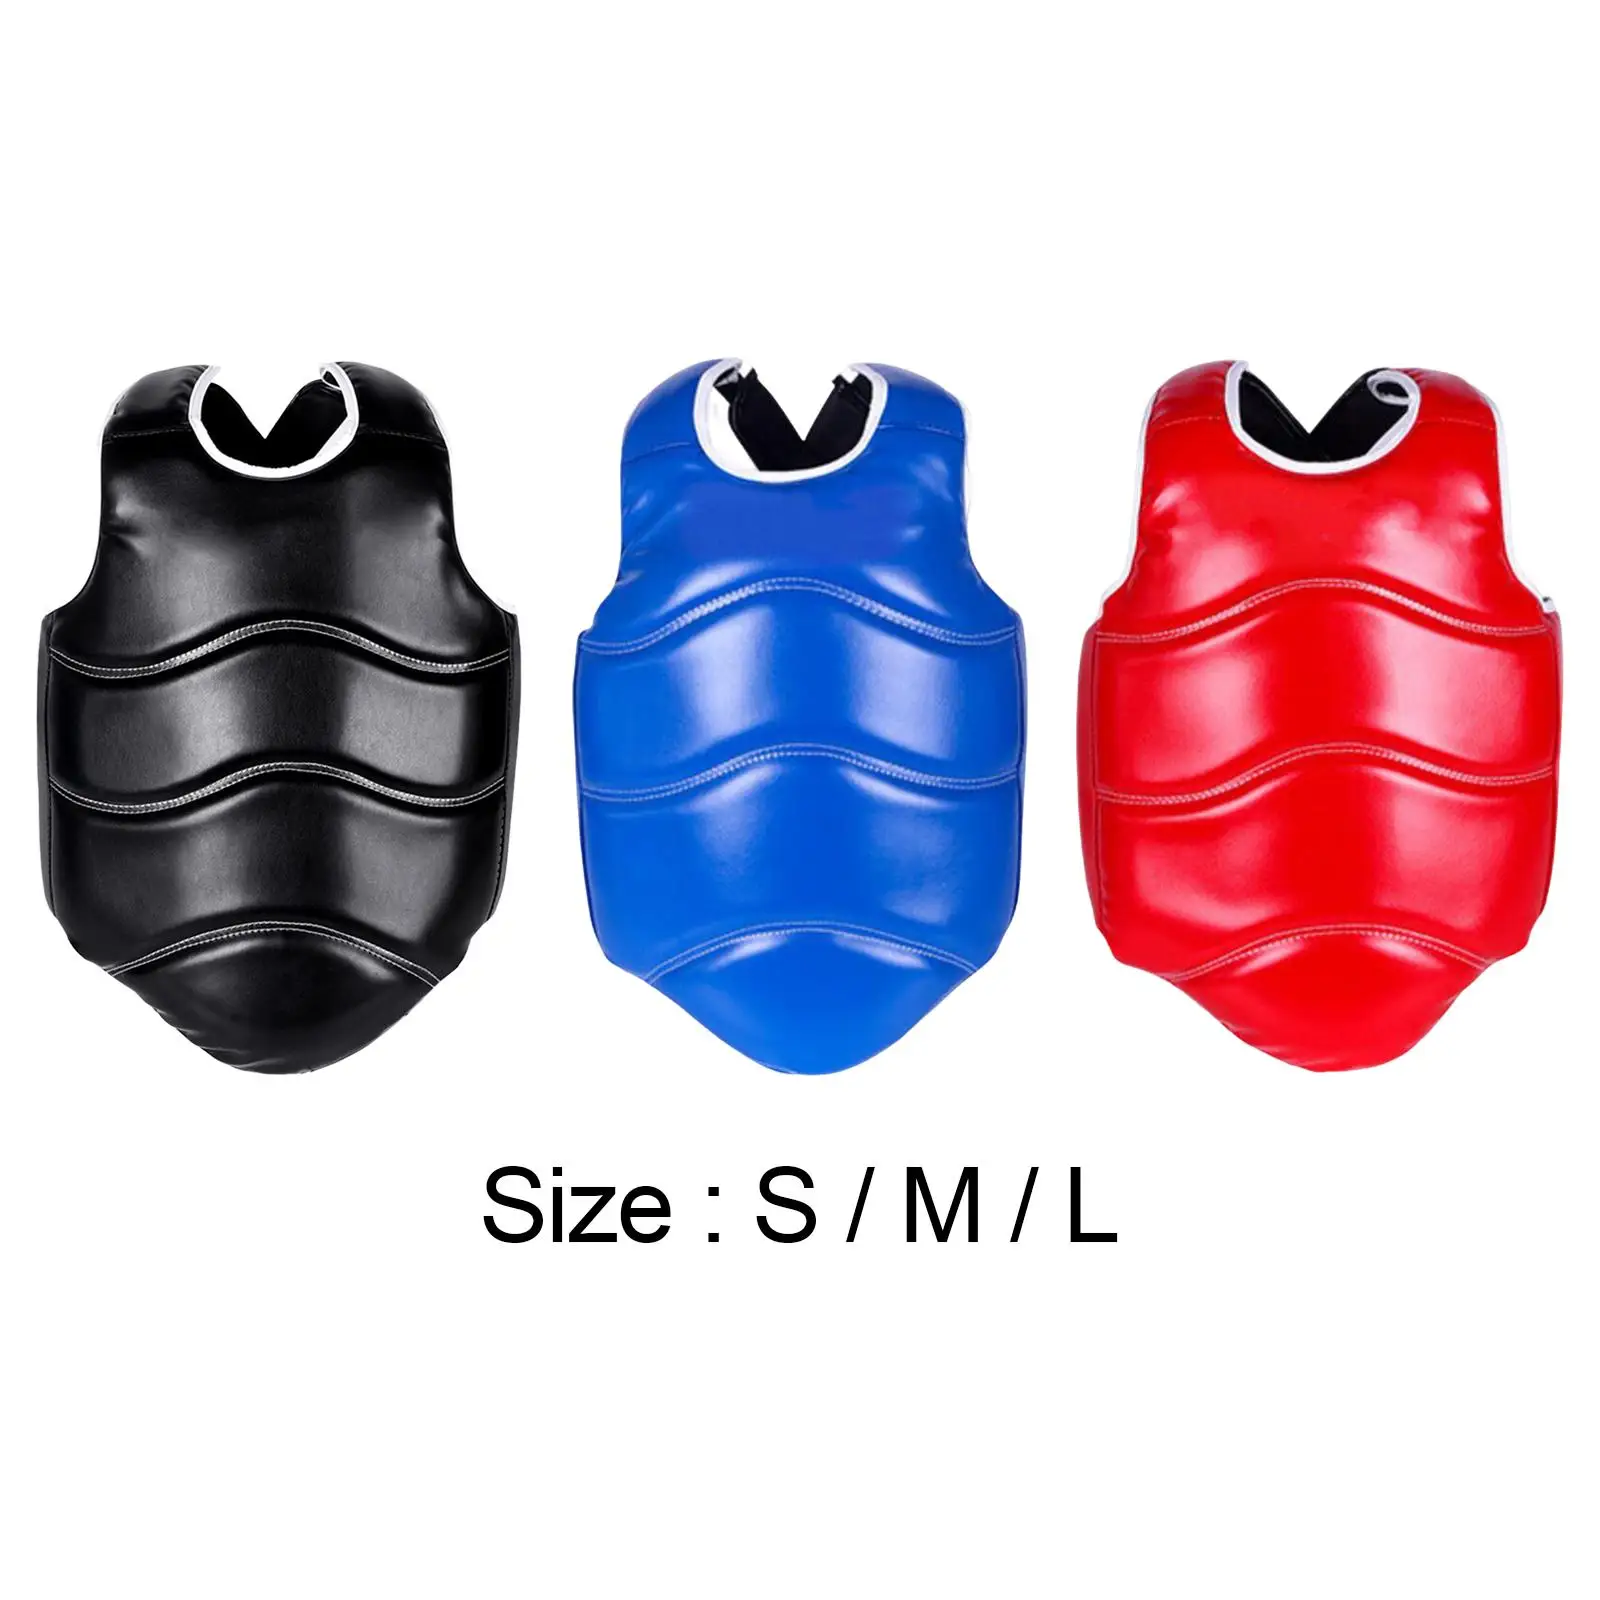 Chest Gear Shock Resistant Lightweight Boxing Chest Guard Karate Chest Protector for Women Men Kids Teen Muay Thai Kickboxing